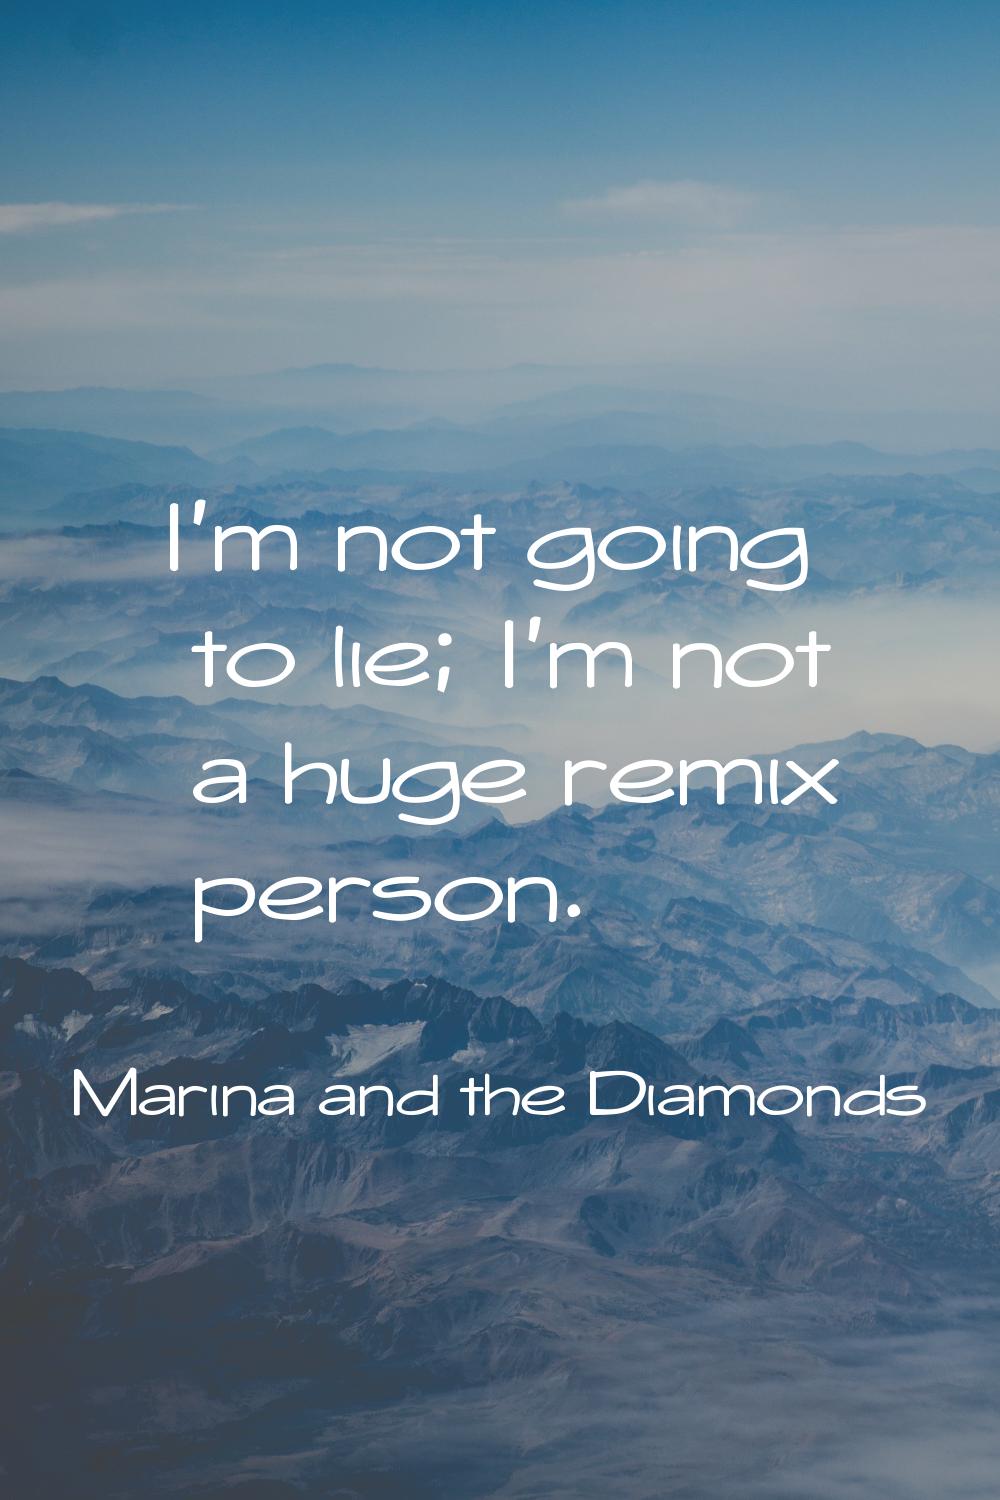 I'm not going to lie; I'm not a huge remix person.